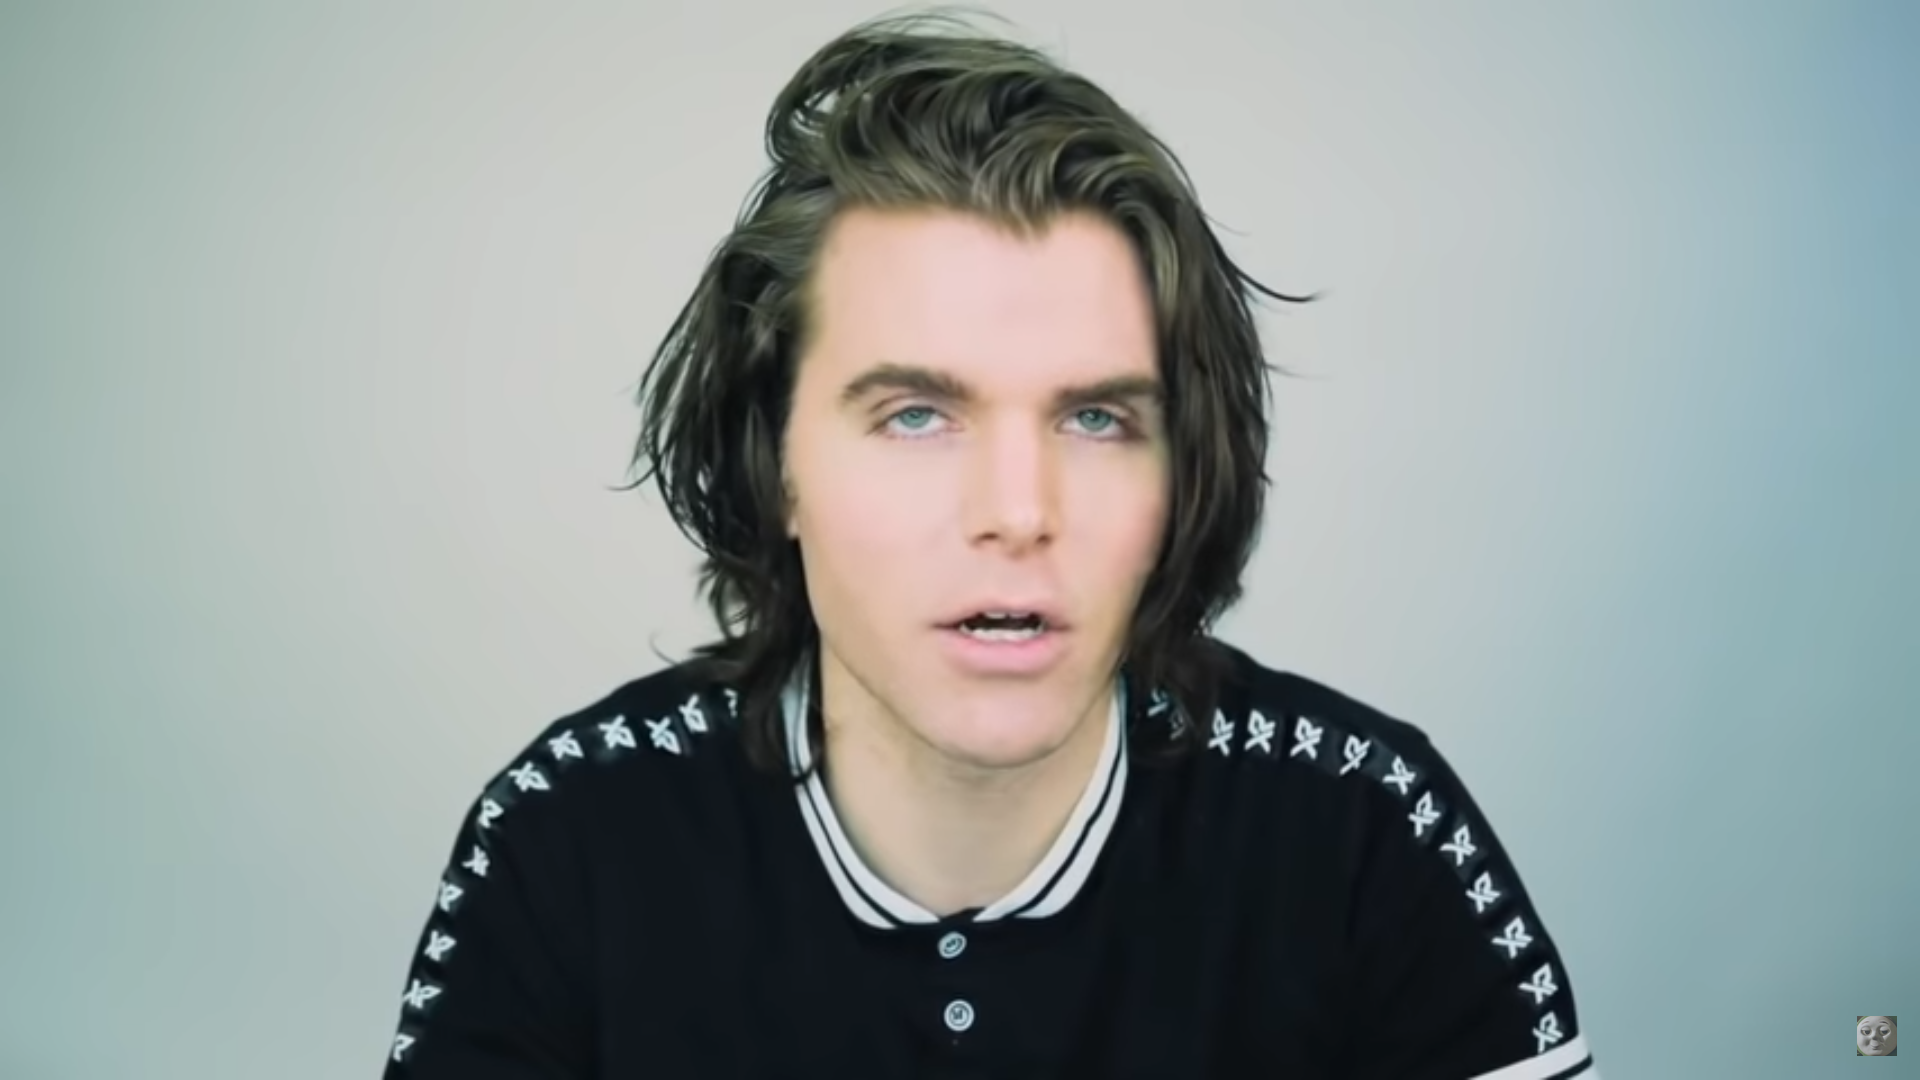 Onision only fans